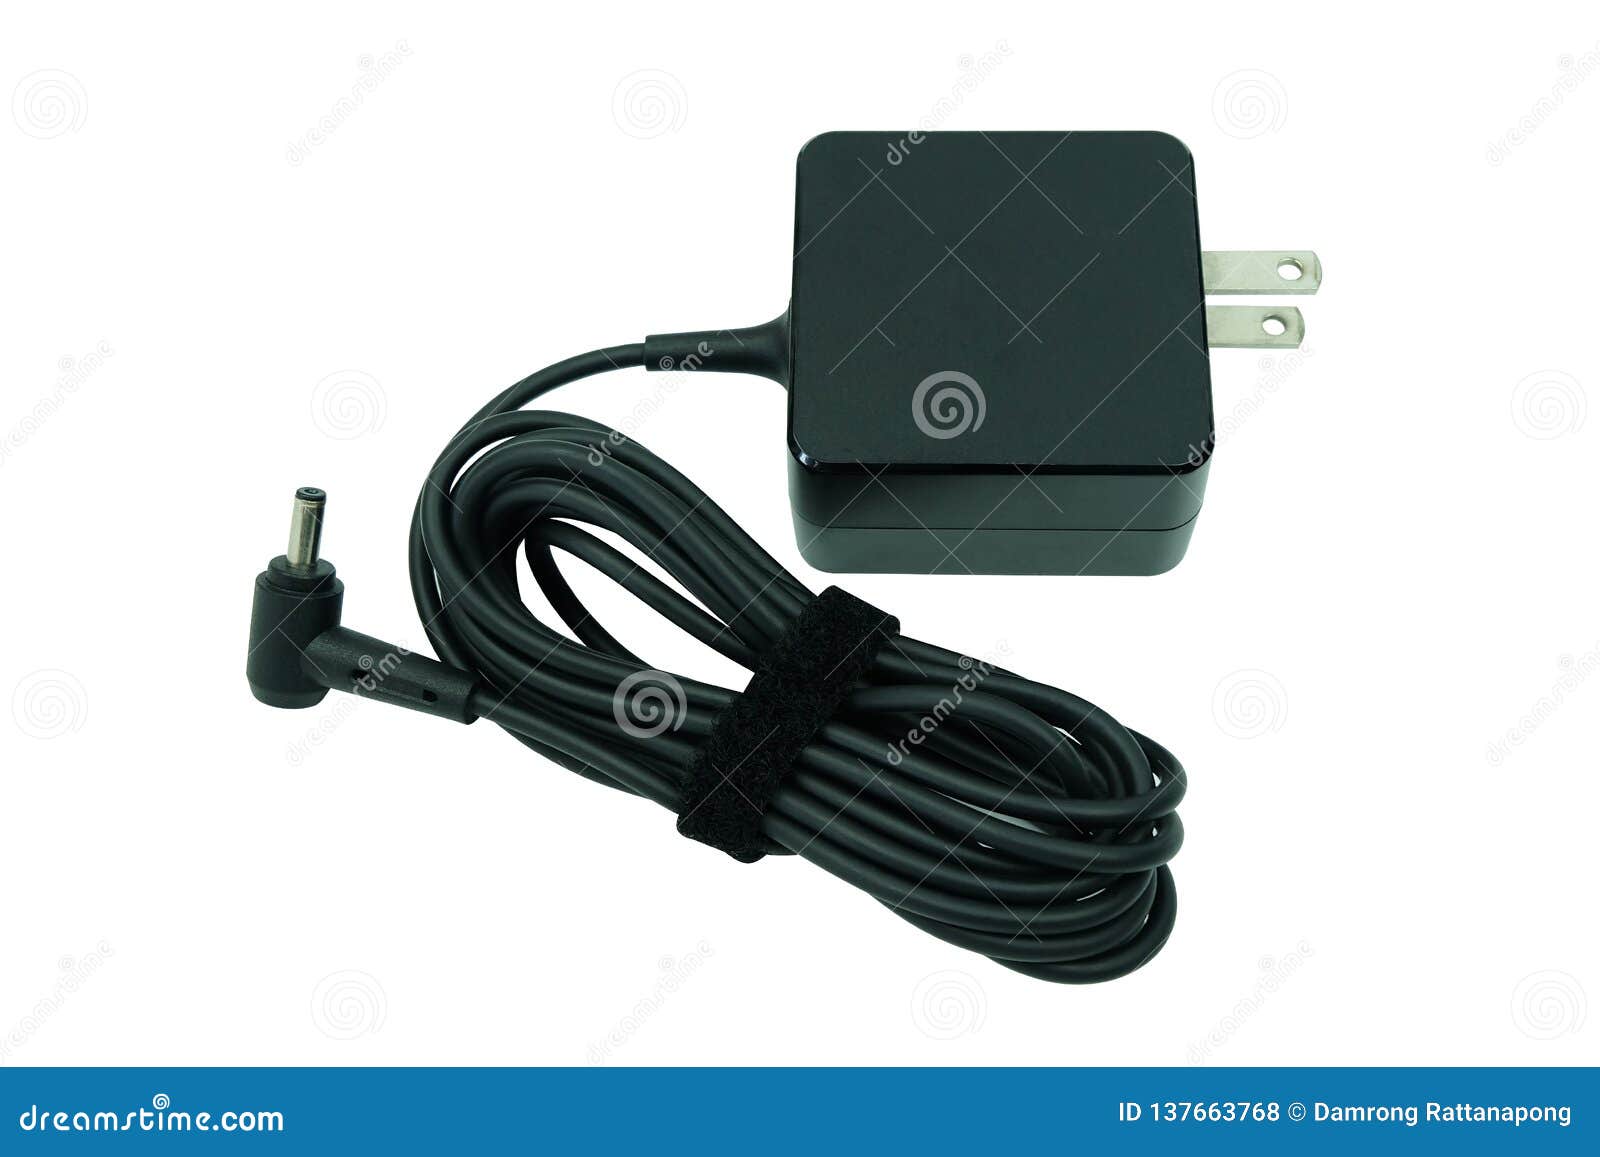 adapter ac/dc power charger of laptop computer  on white